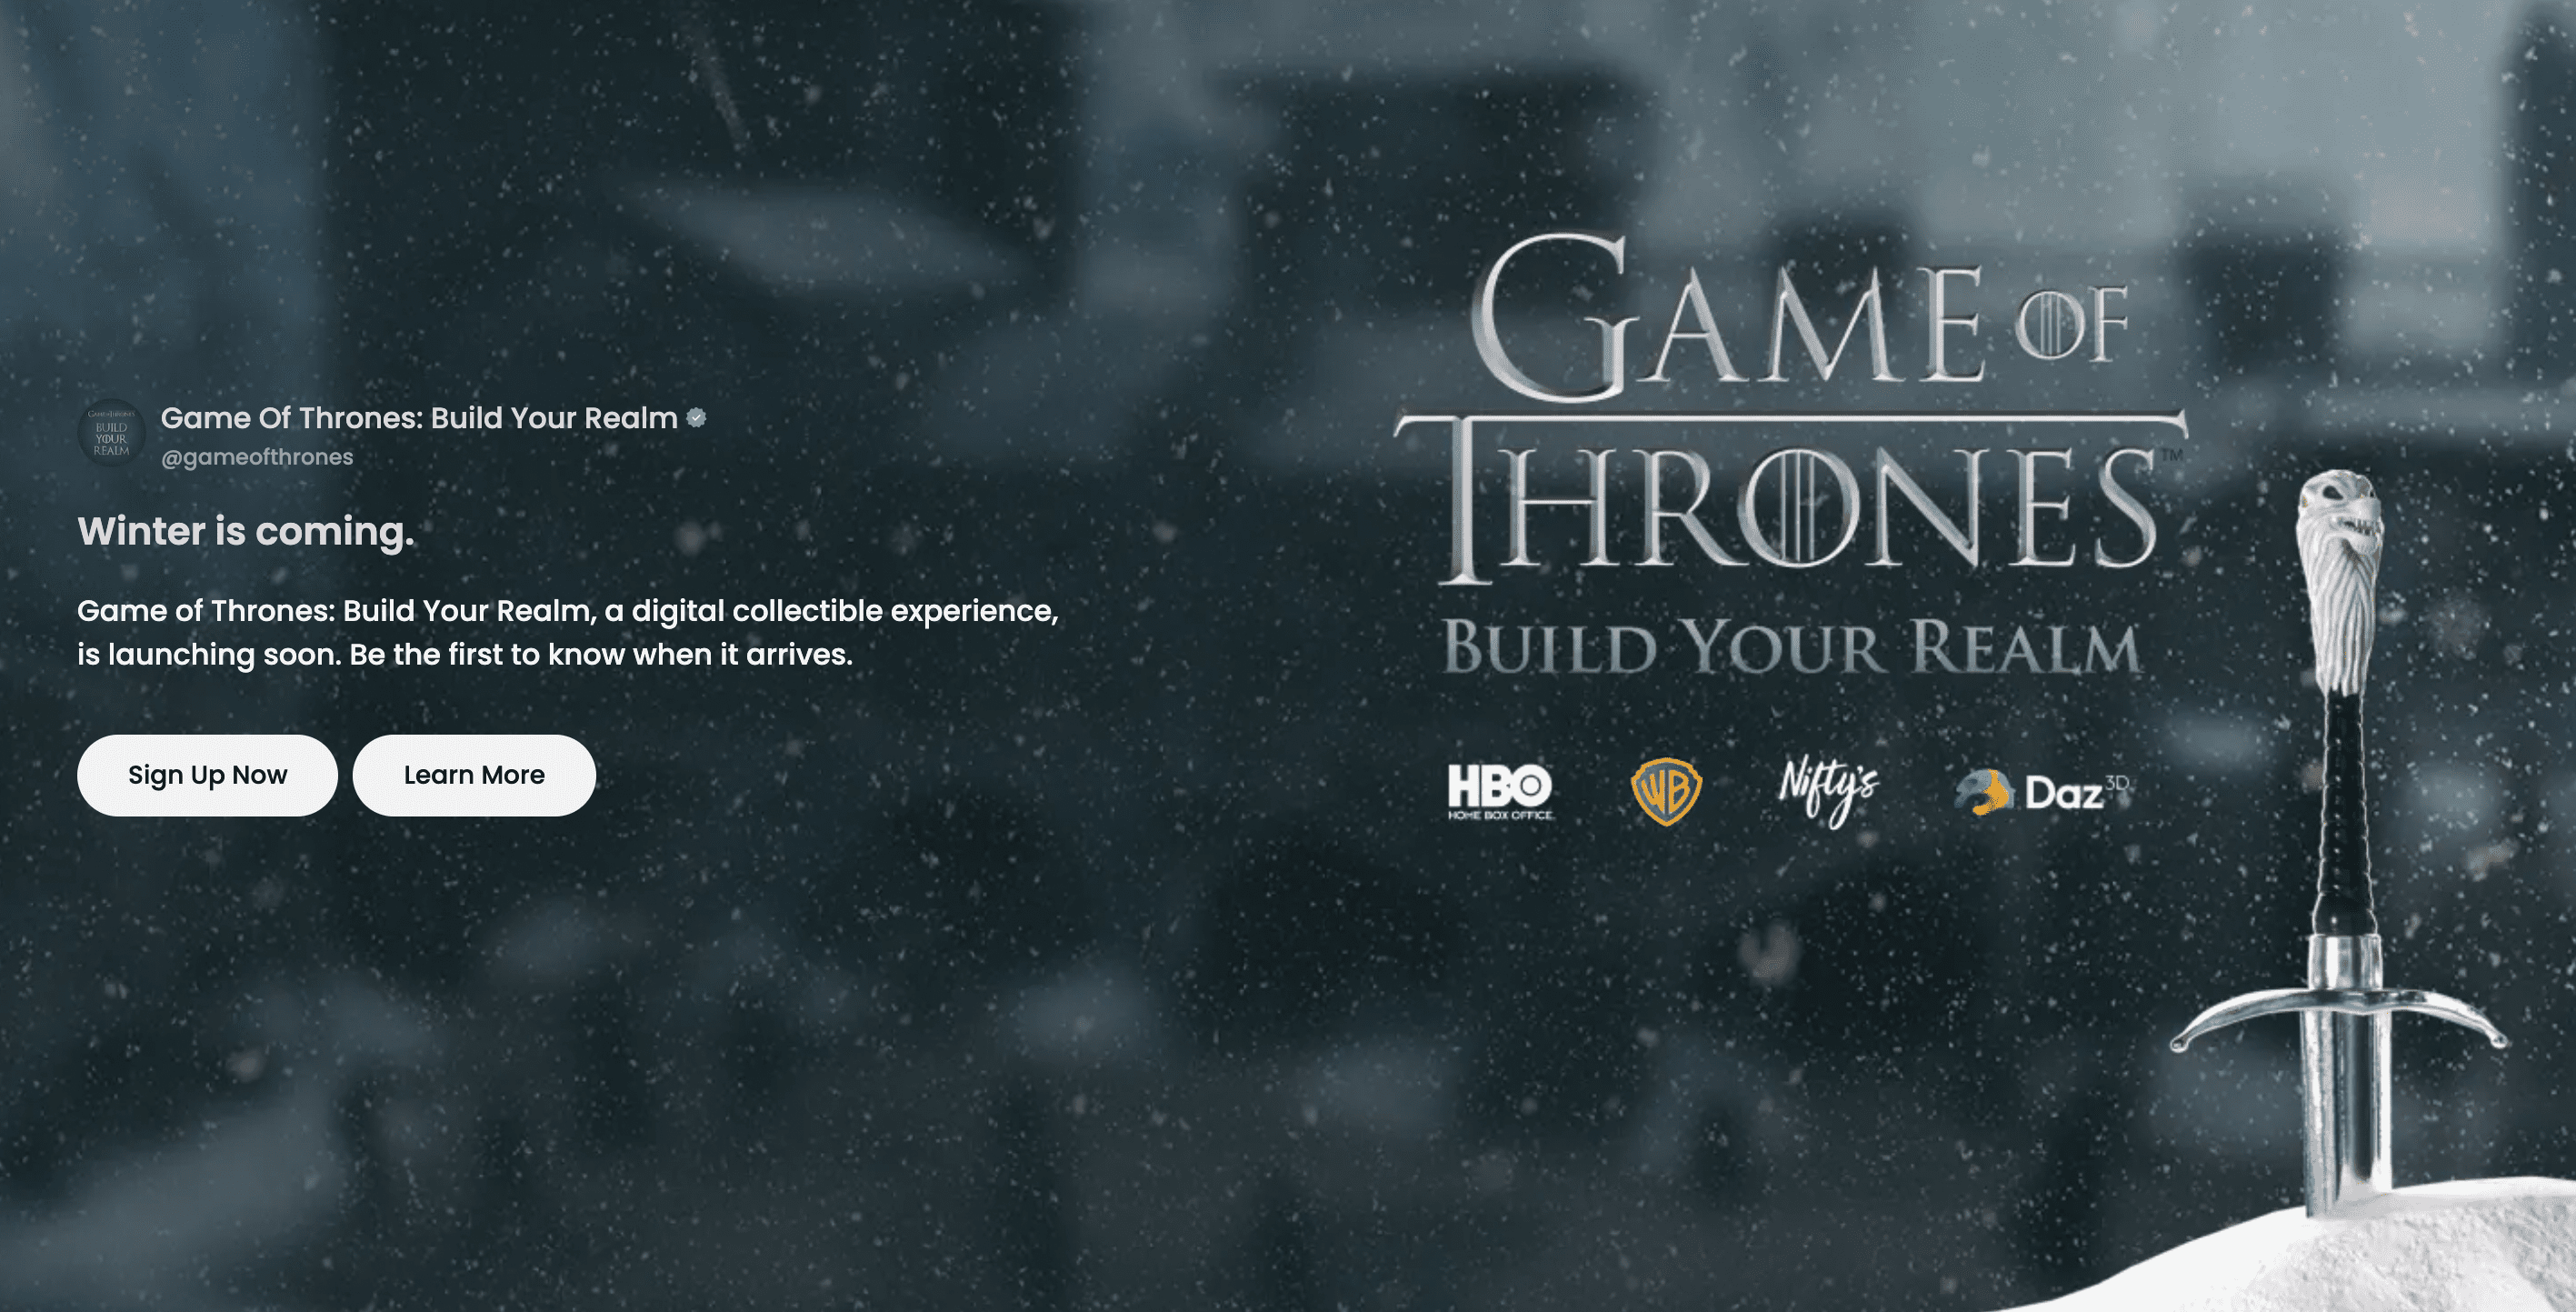 Game of Thrones NFT's coming this Winter with HBO and WBD partnership -  Nifty's